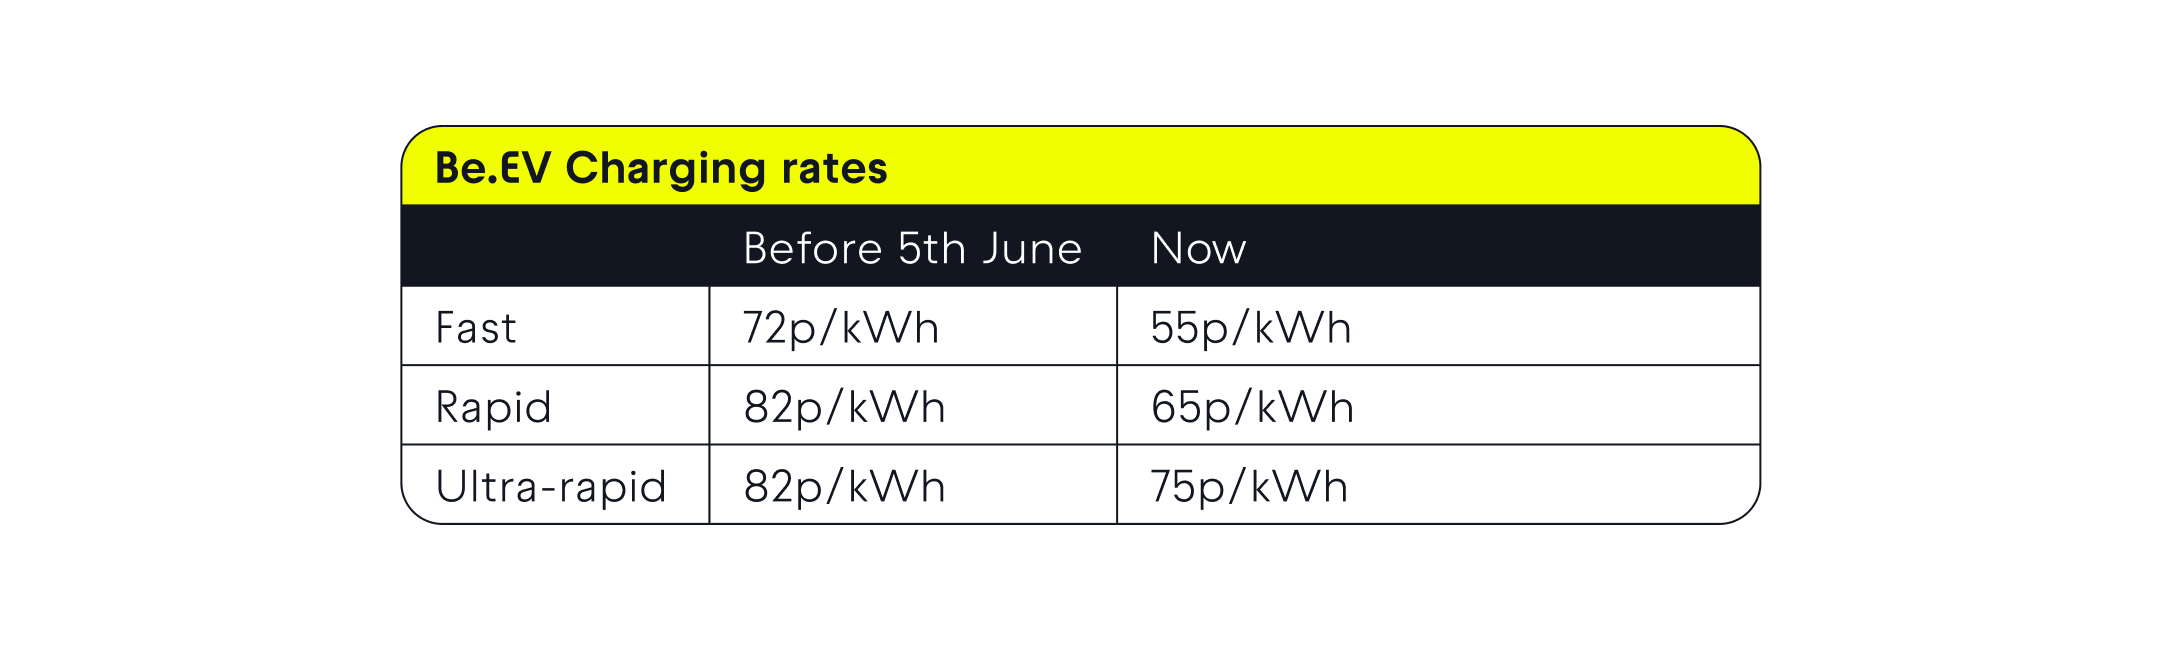 Be.EV charging rates and how they changed